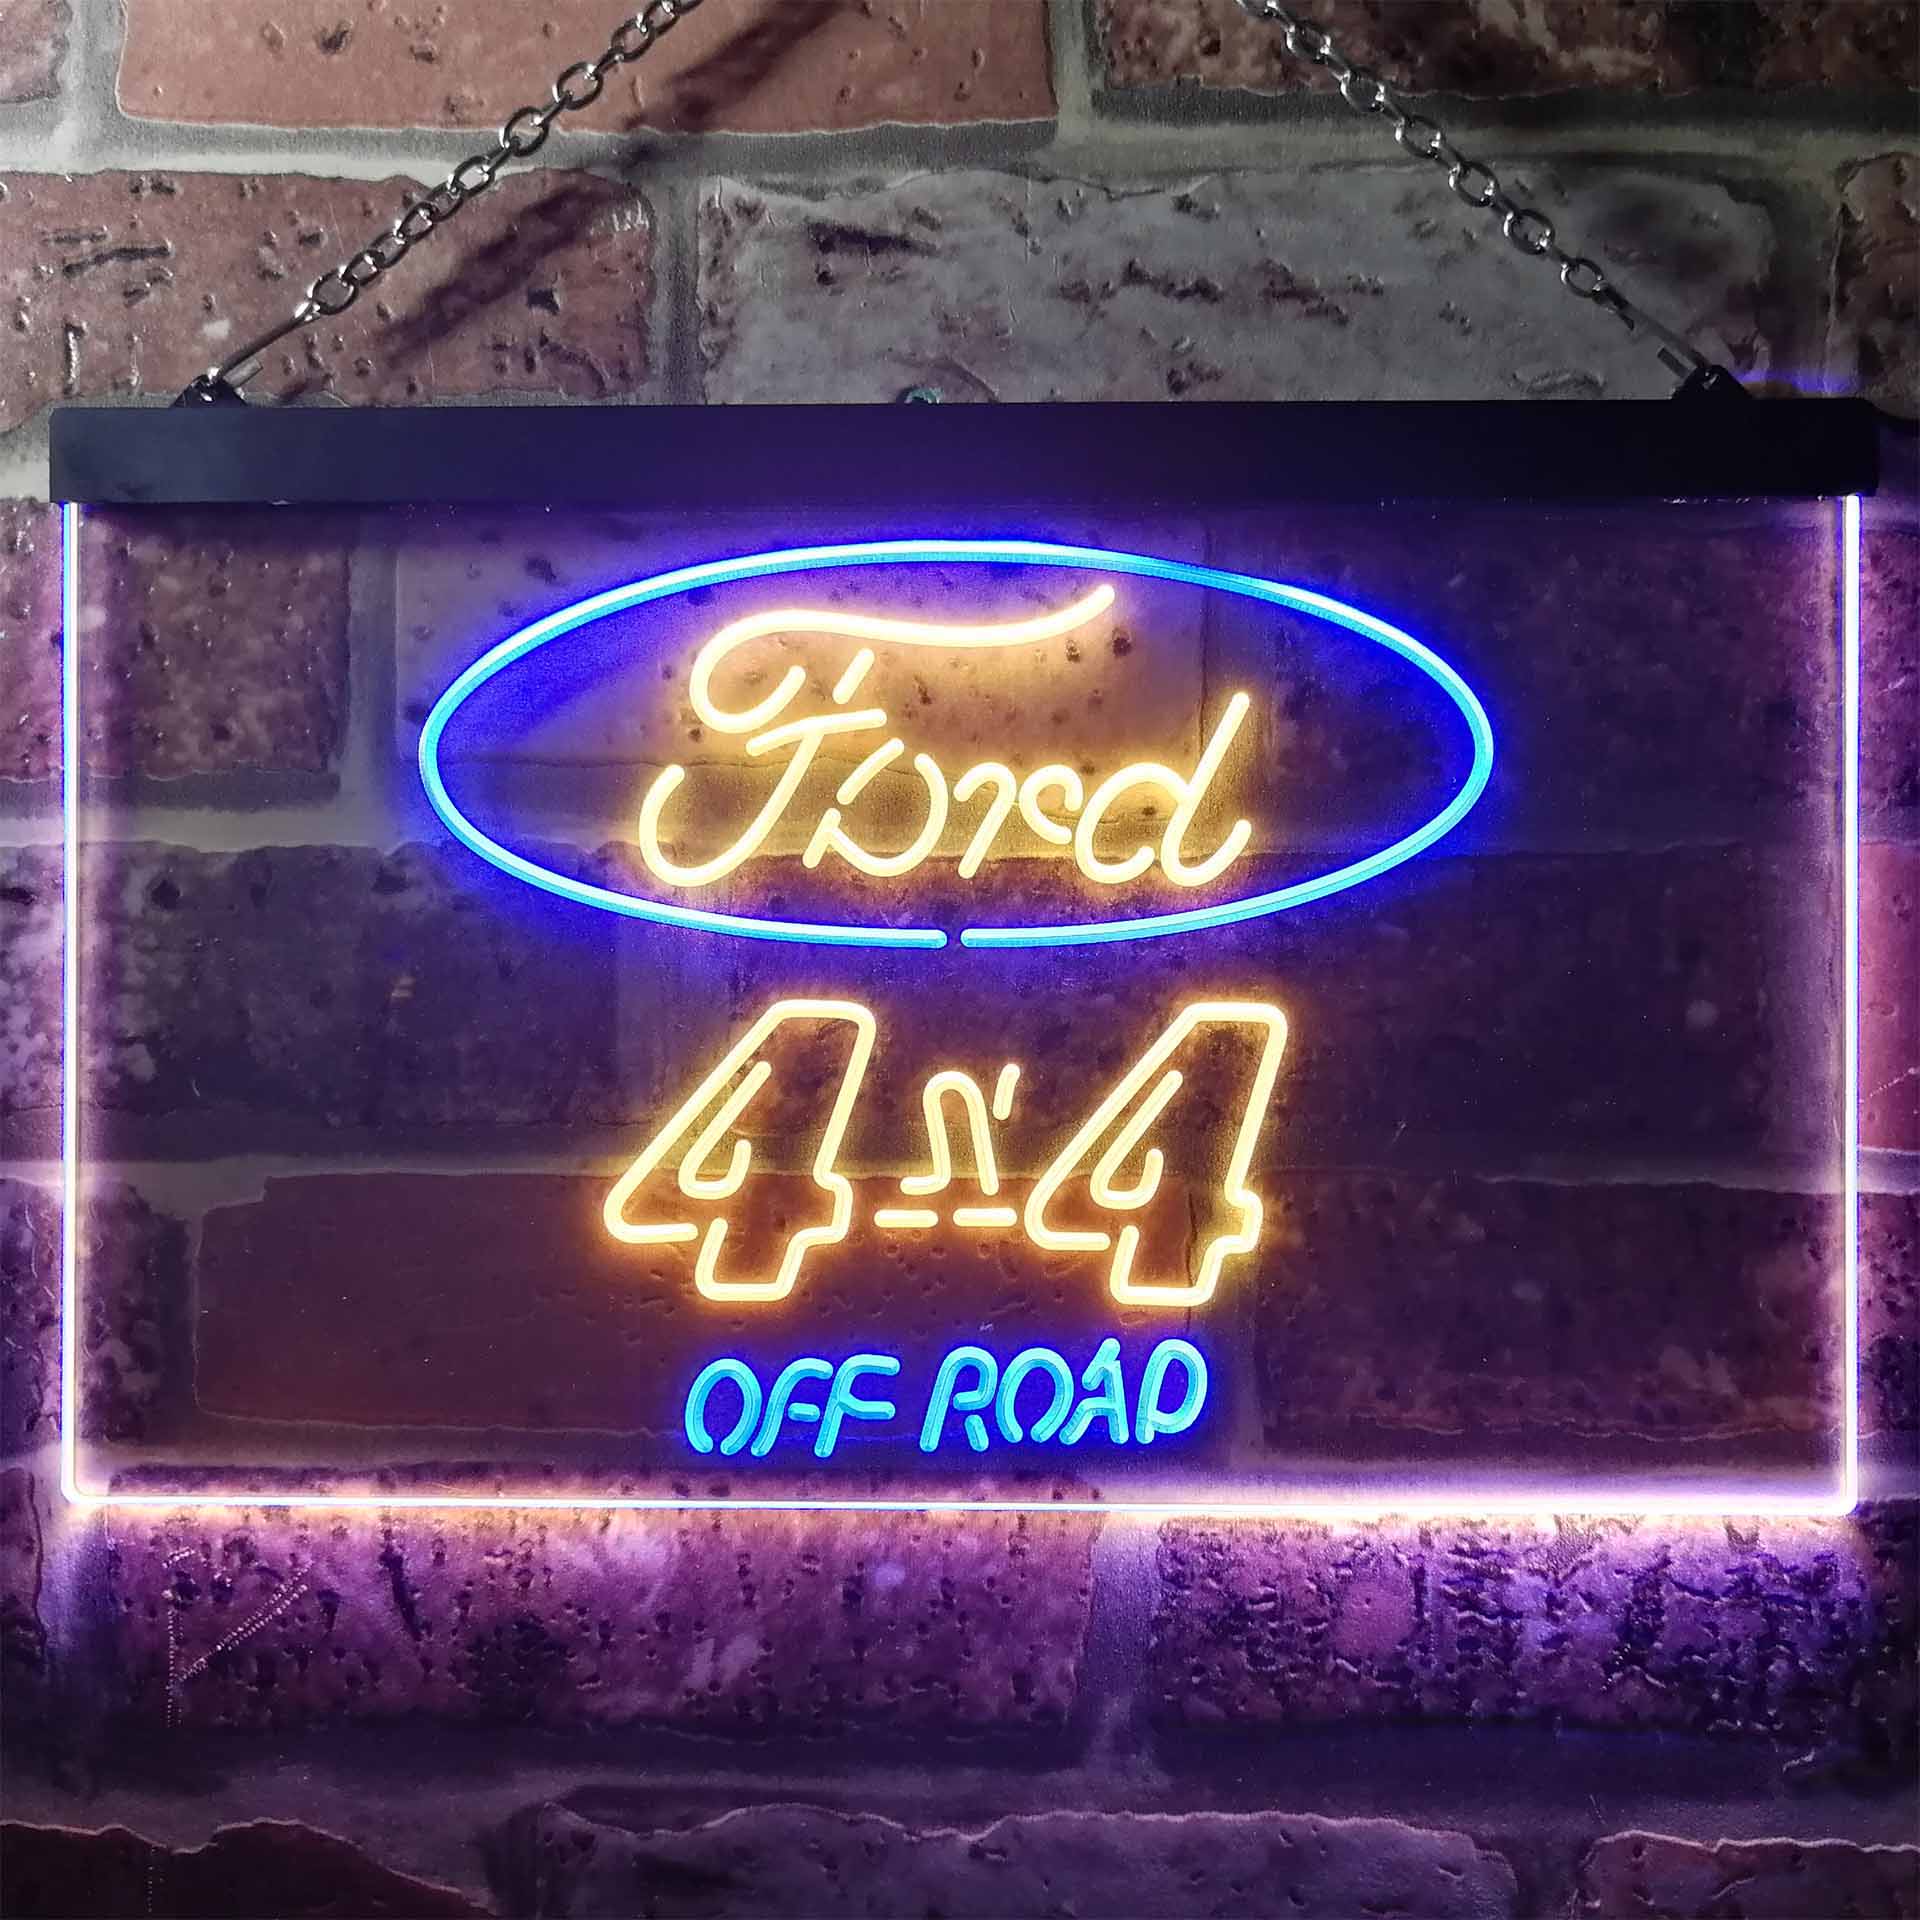 Ford 4x4 Off-road Jeep Neon-Like LED Sign